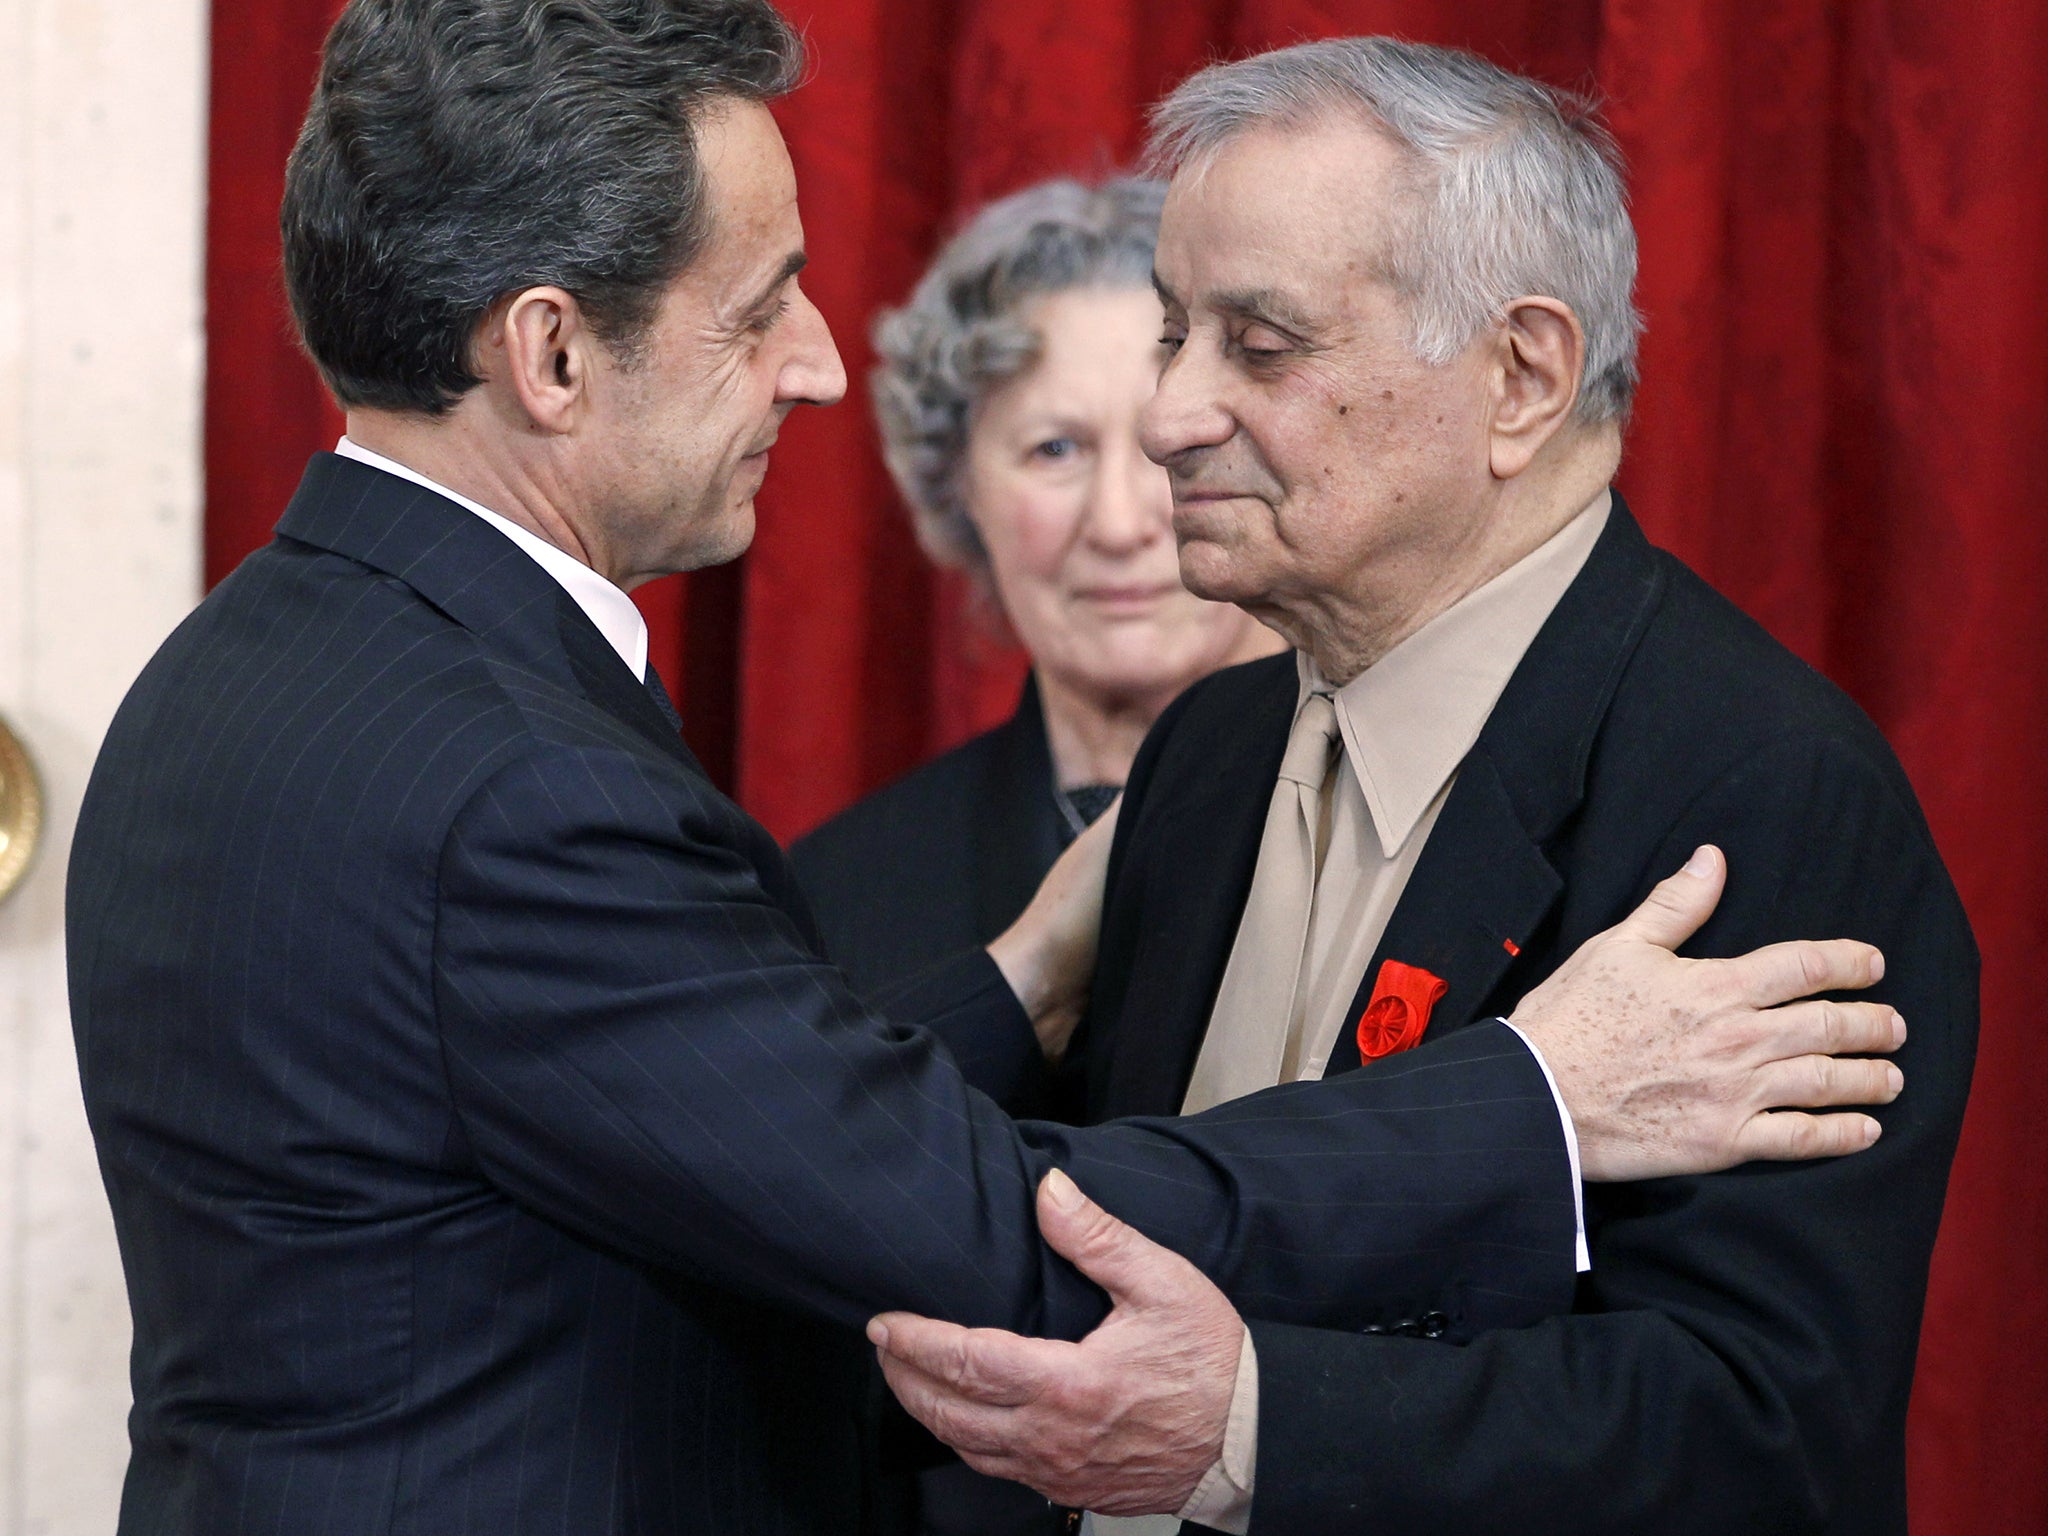 Tchakarian was awarded the Legion of Honour by French president Nicolas Sarkozy in 2012